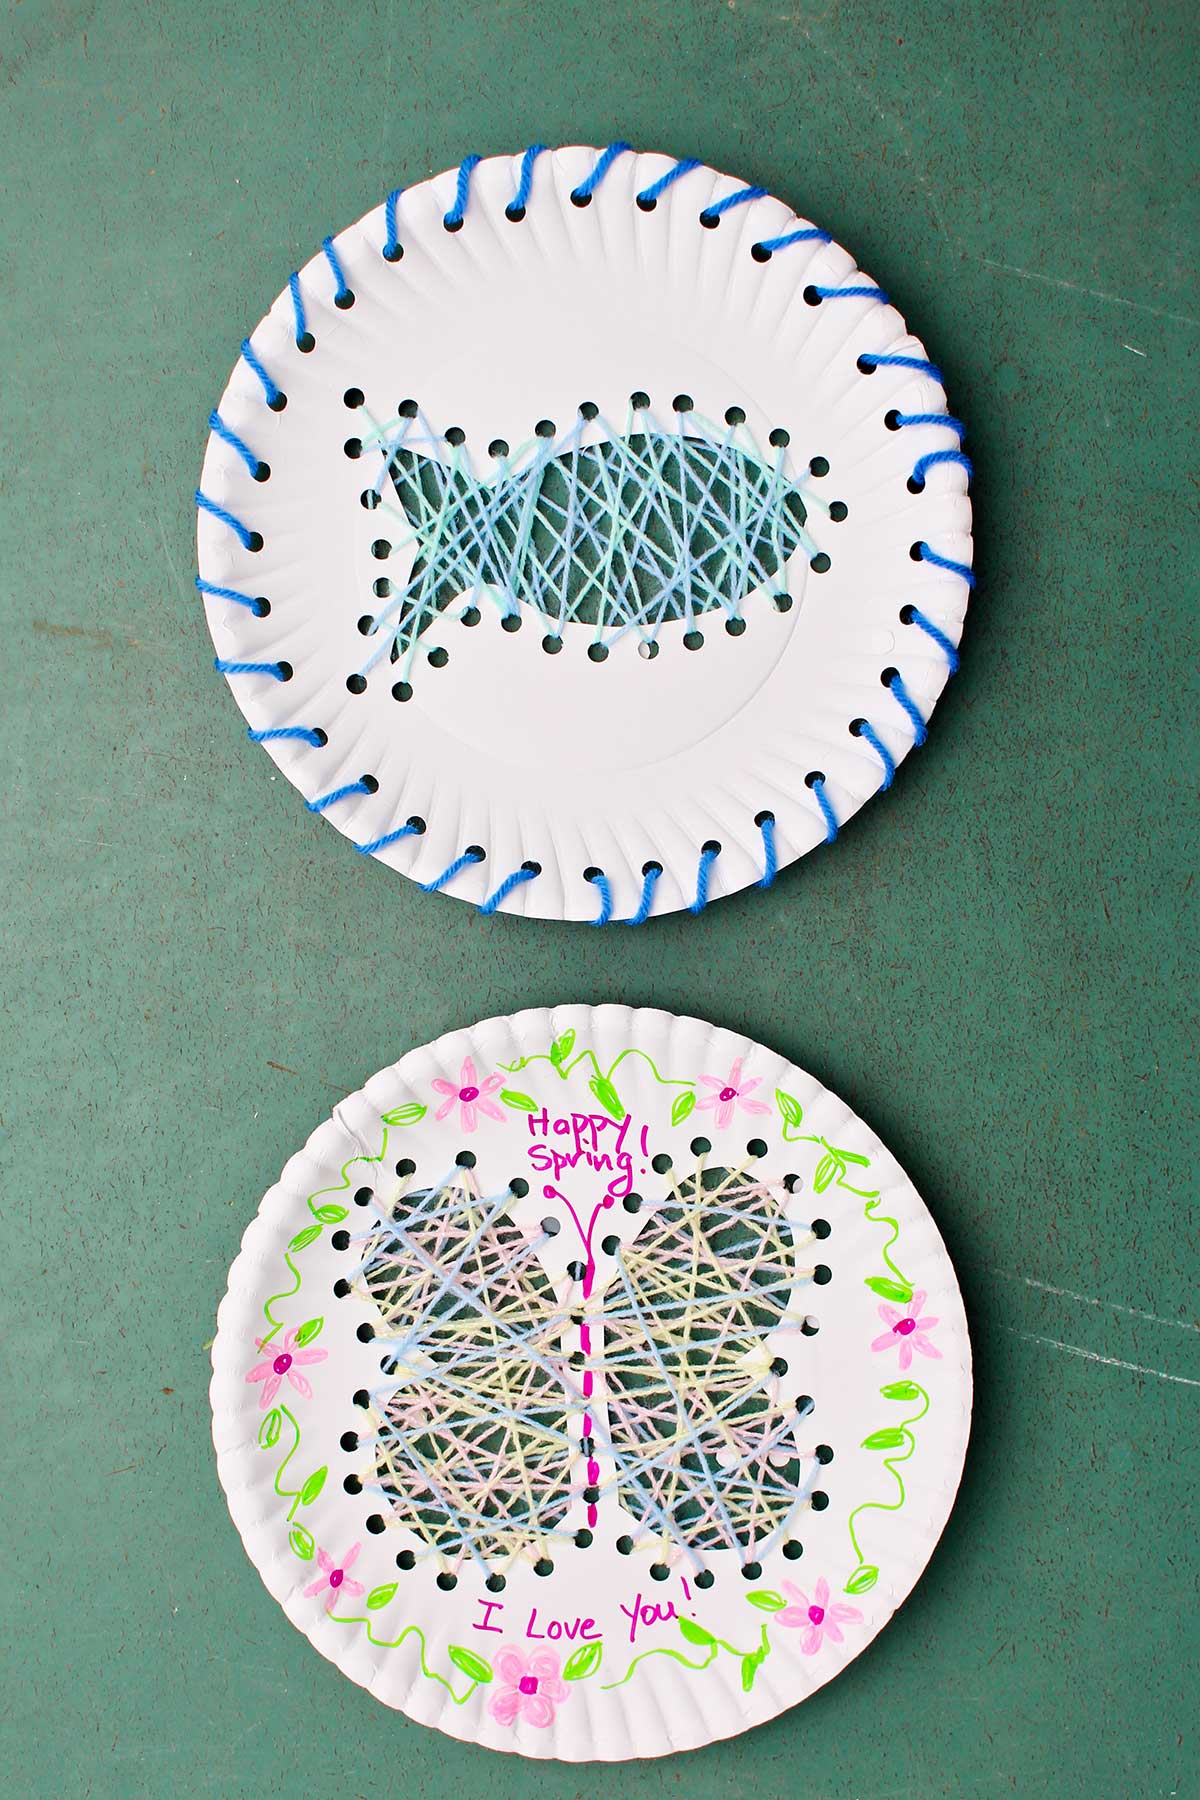 Two completed Paper Plate String Art projects. One of a fish with blue yarn and one of a butterfly with flower decorations and "Happy Spring" I Love You" written on the plate.